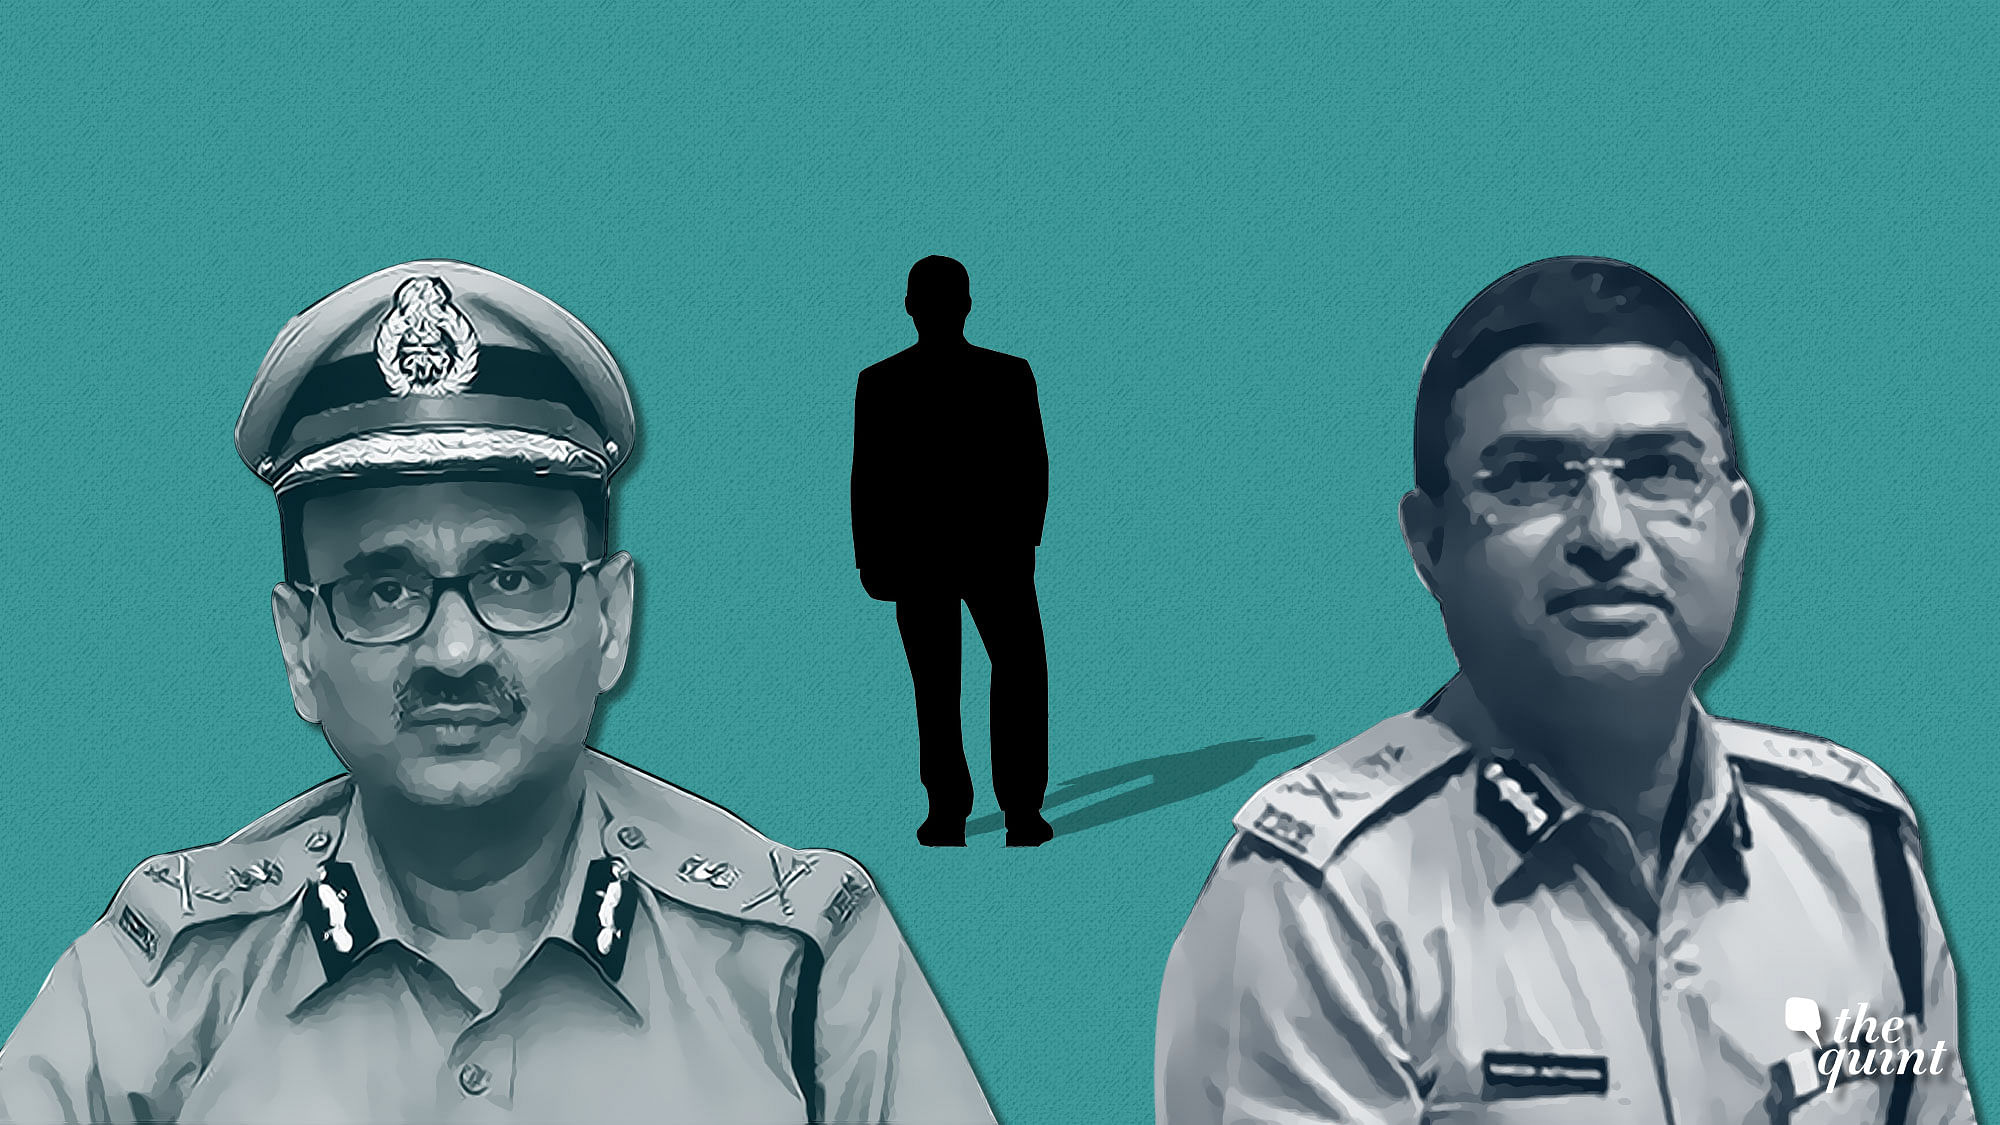 Sathish Sana, the key player of the CBI row, on whose complaint a bribery case was registered against the Special Director CBI Rakesh Asthana – moved to the Supreme Court on Monday, 29 October, seeking police protection.